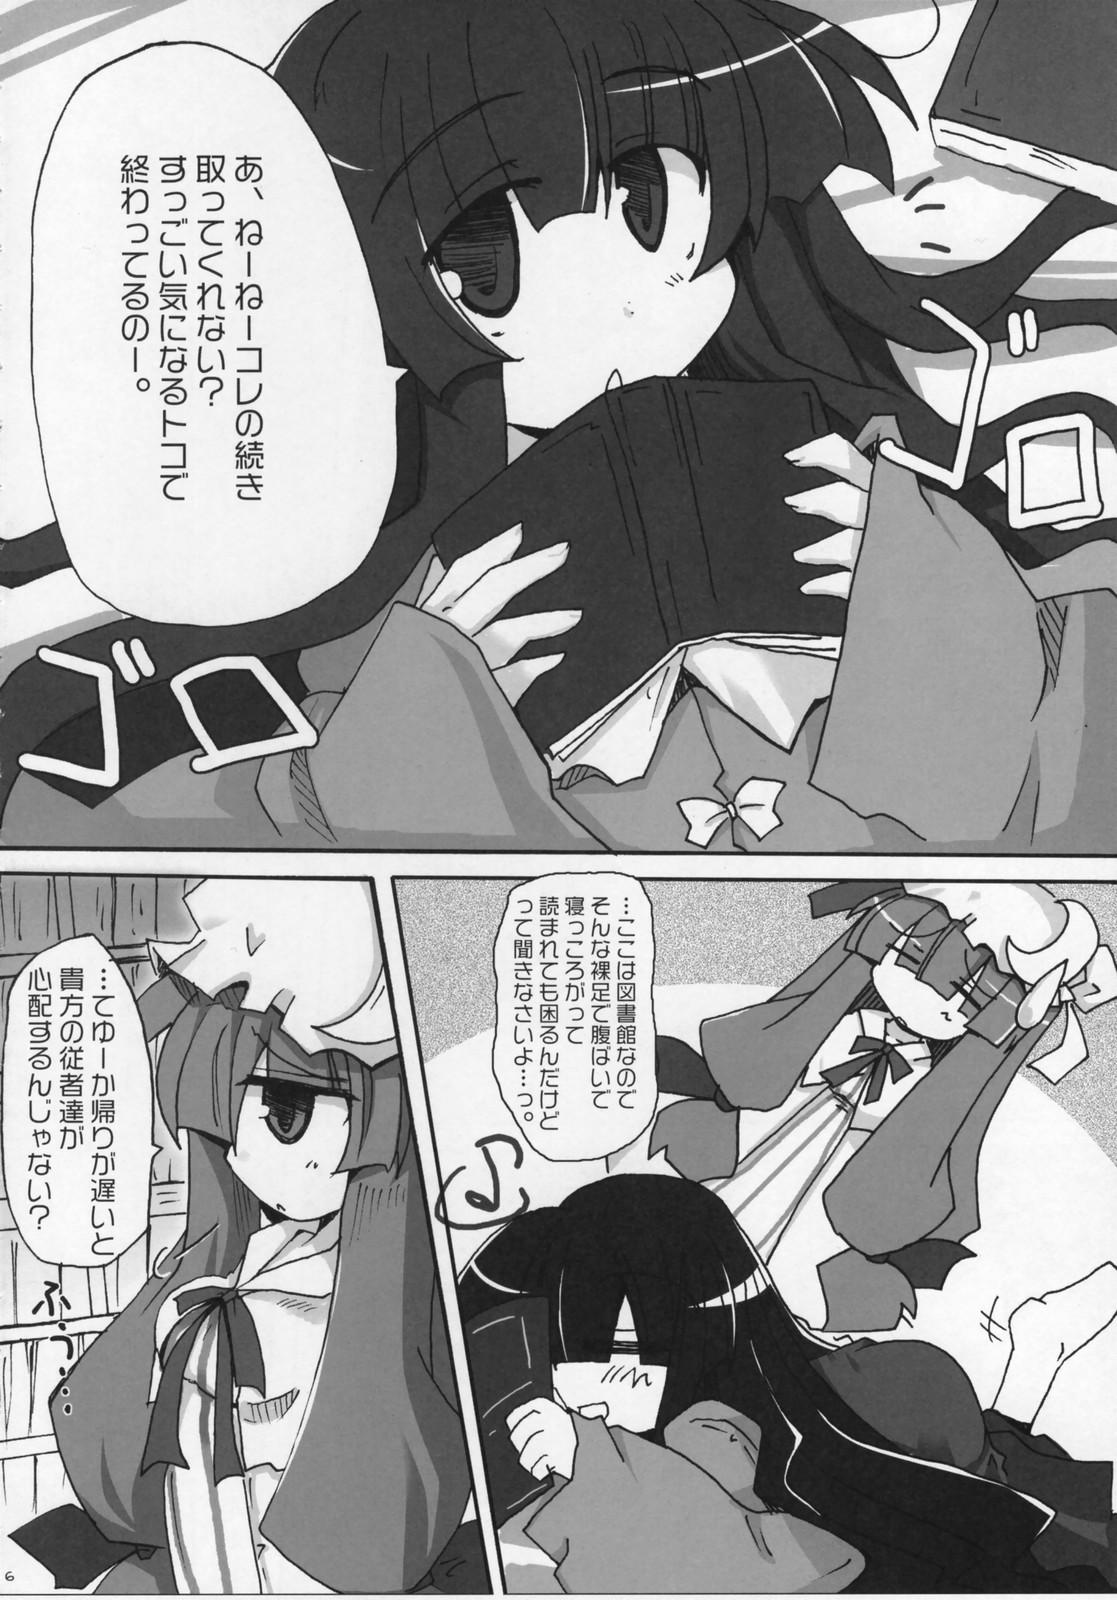 Housewife [Oppai-Bloomer!] Love-chuchu-GOGO-2! (Touhou Project) - Touhou project Bisexual - Page 5